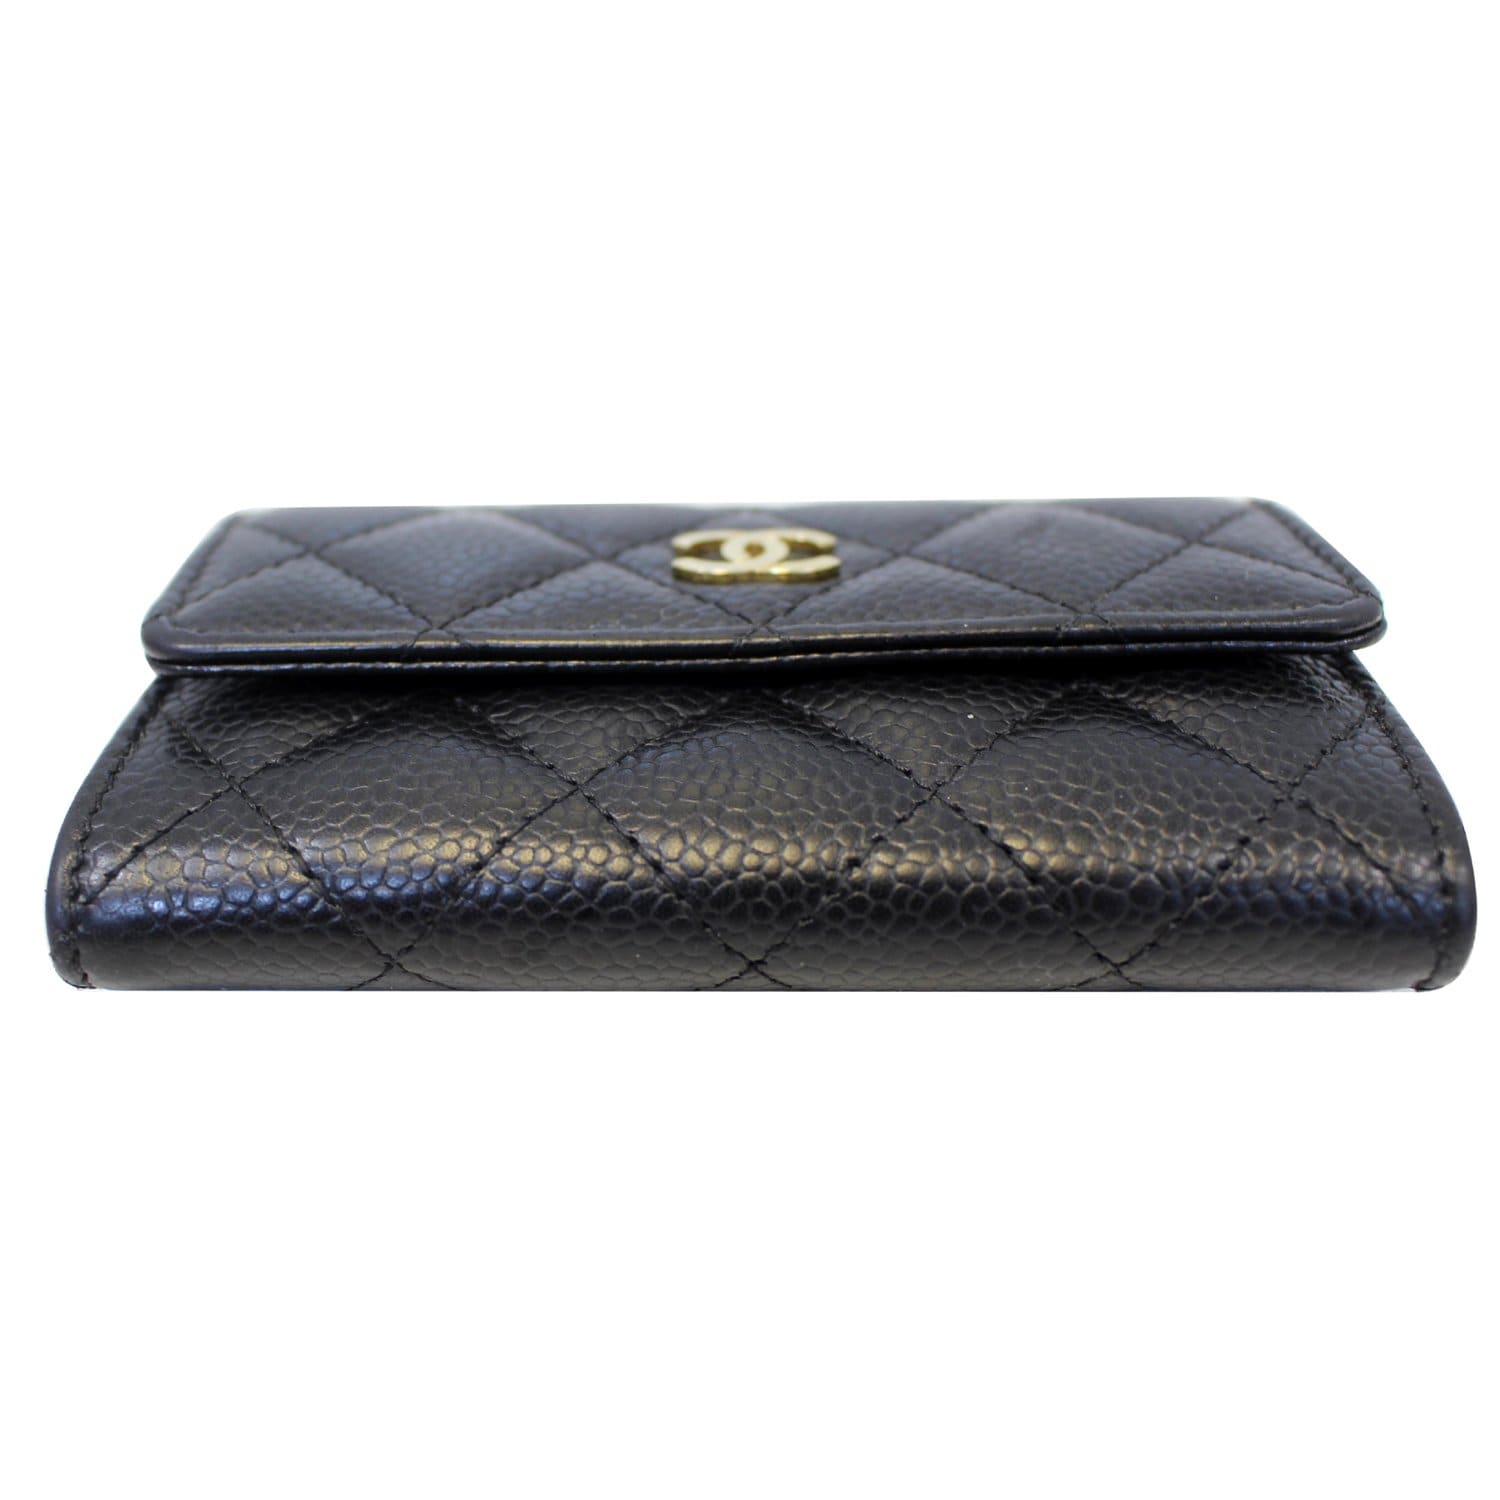 Chanel Quilted Flap Card Holder Black Caviar Silver Hardware – Coco  Approved Studio